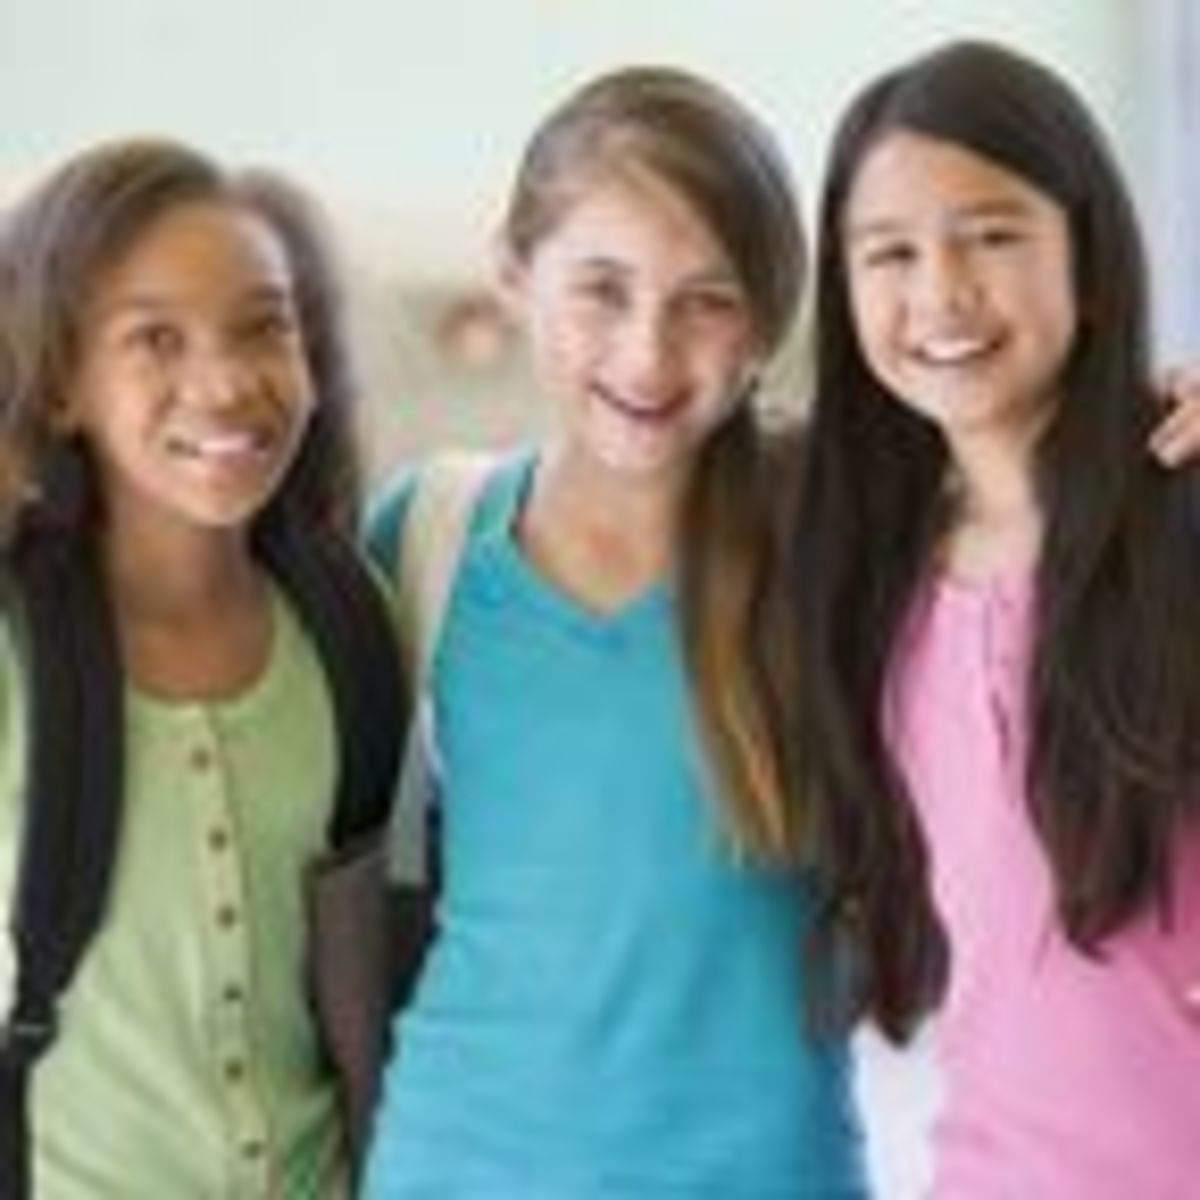 School Girl Blue Picture - The Importance of Middle School | Psychology Today